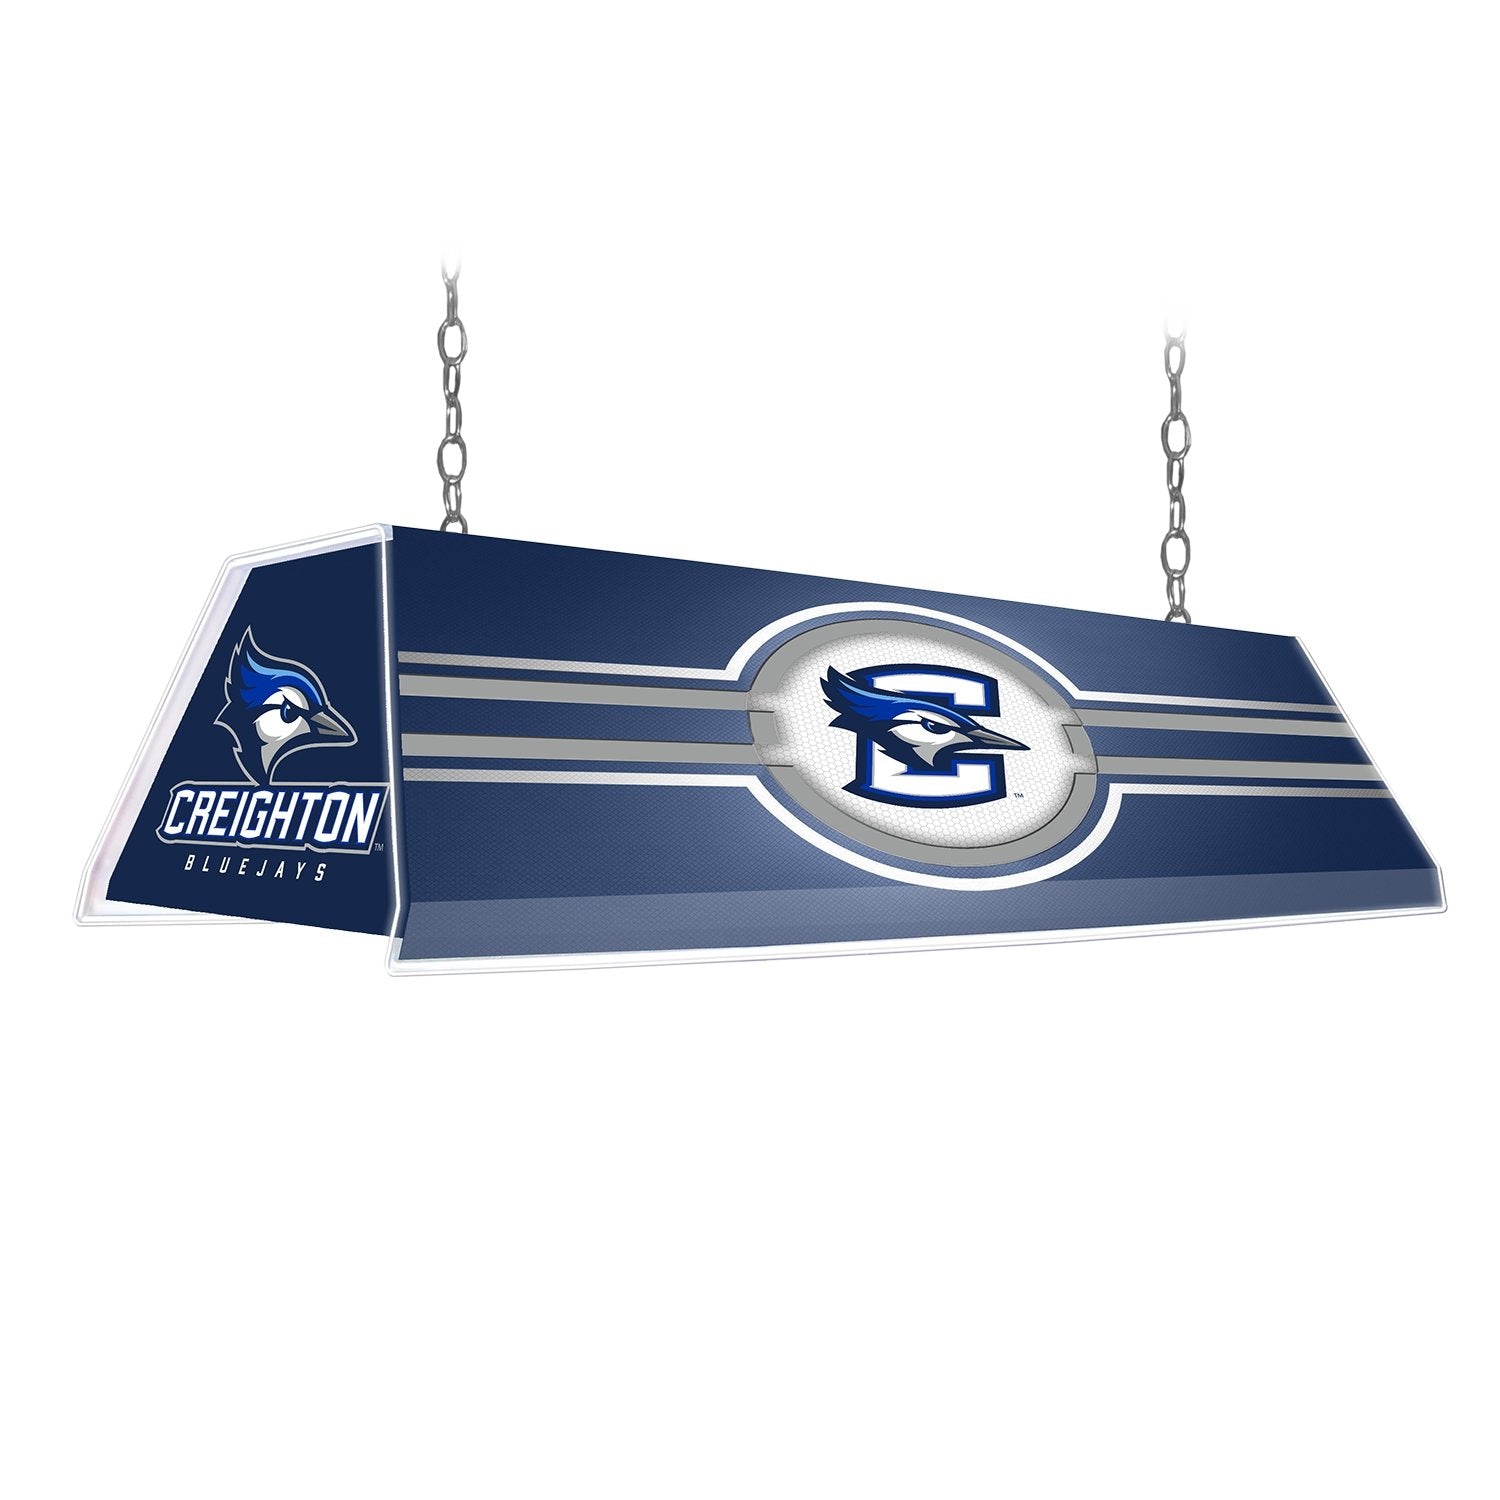 Creighton Bluejays swimming gifts